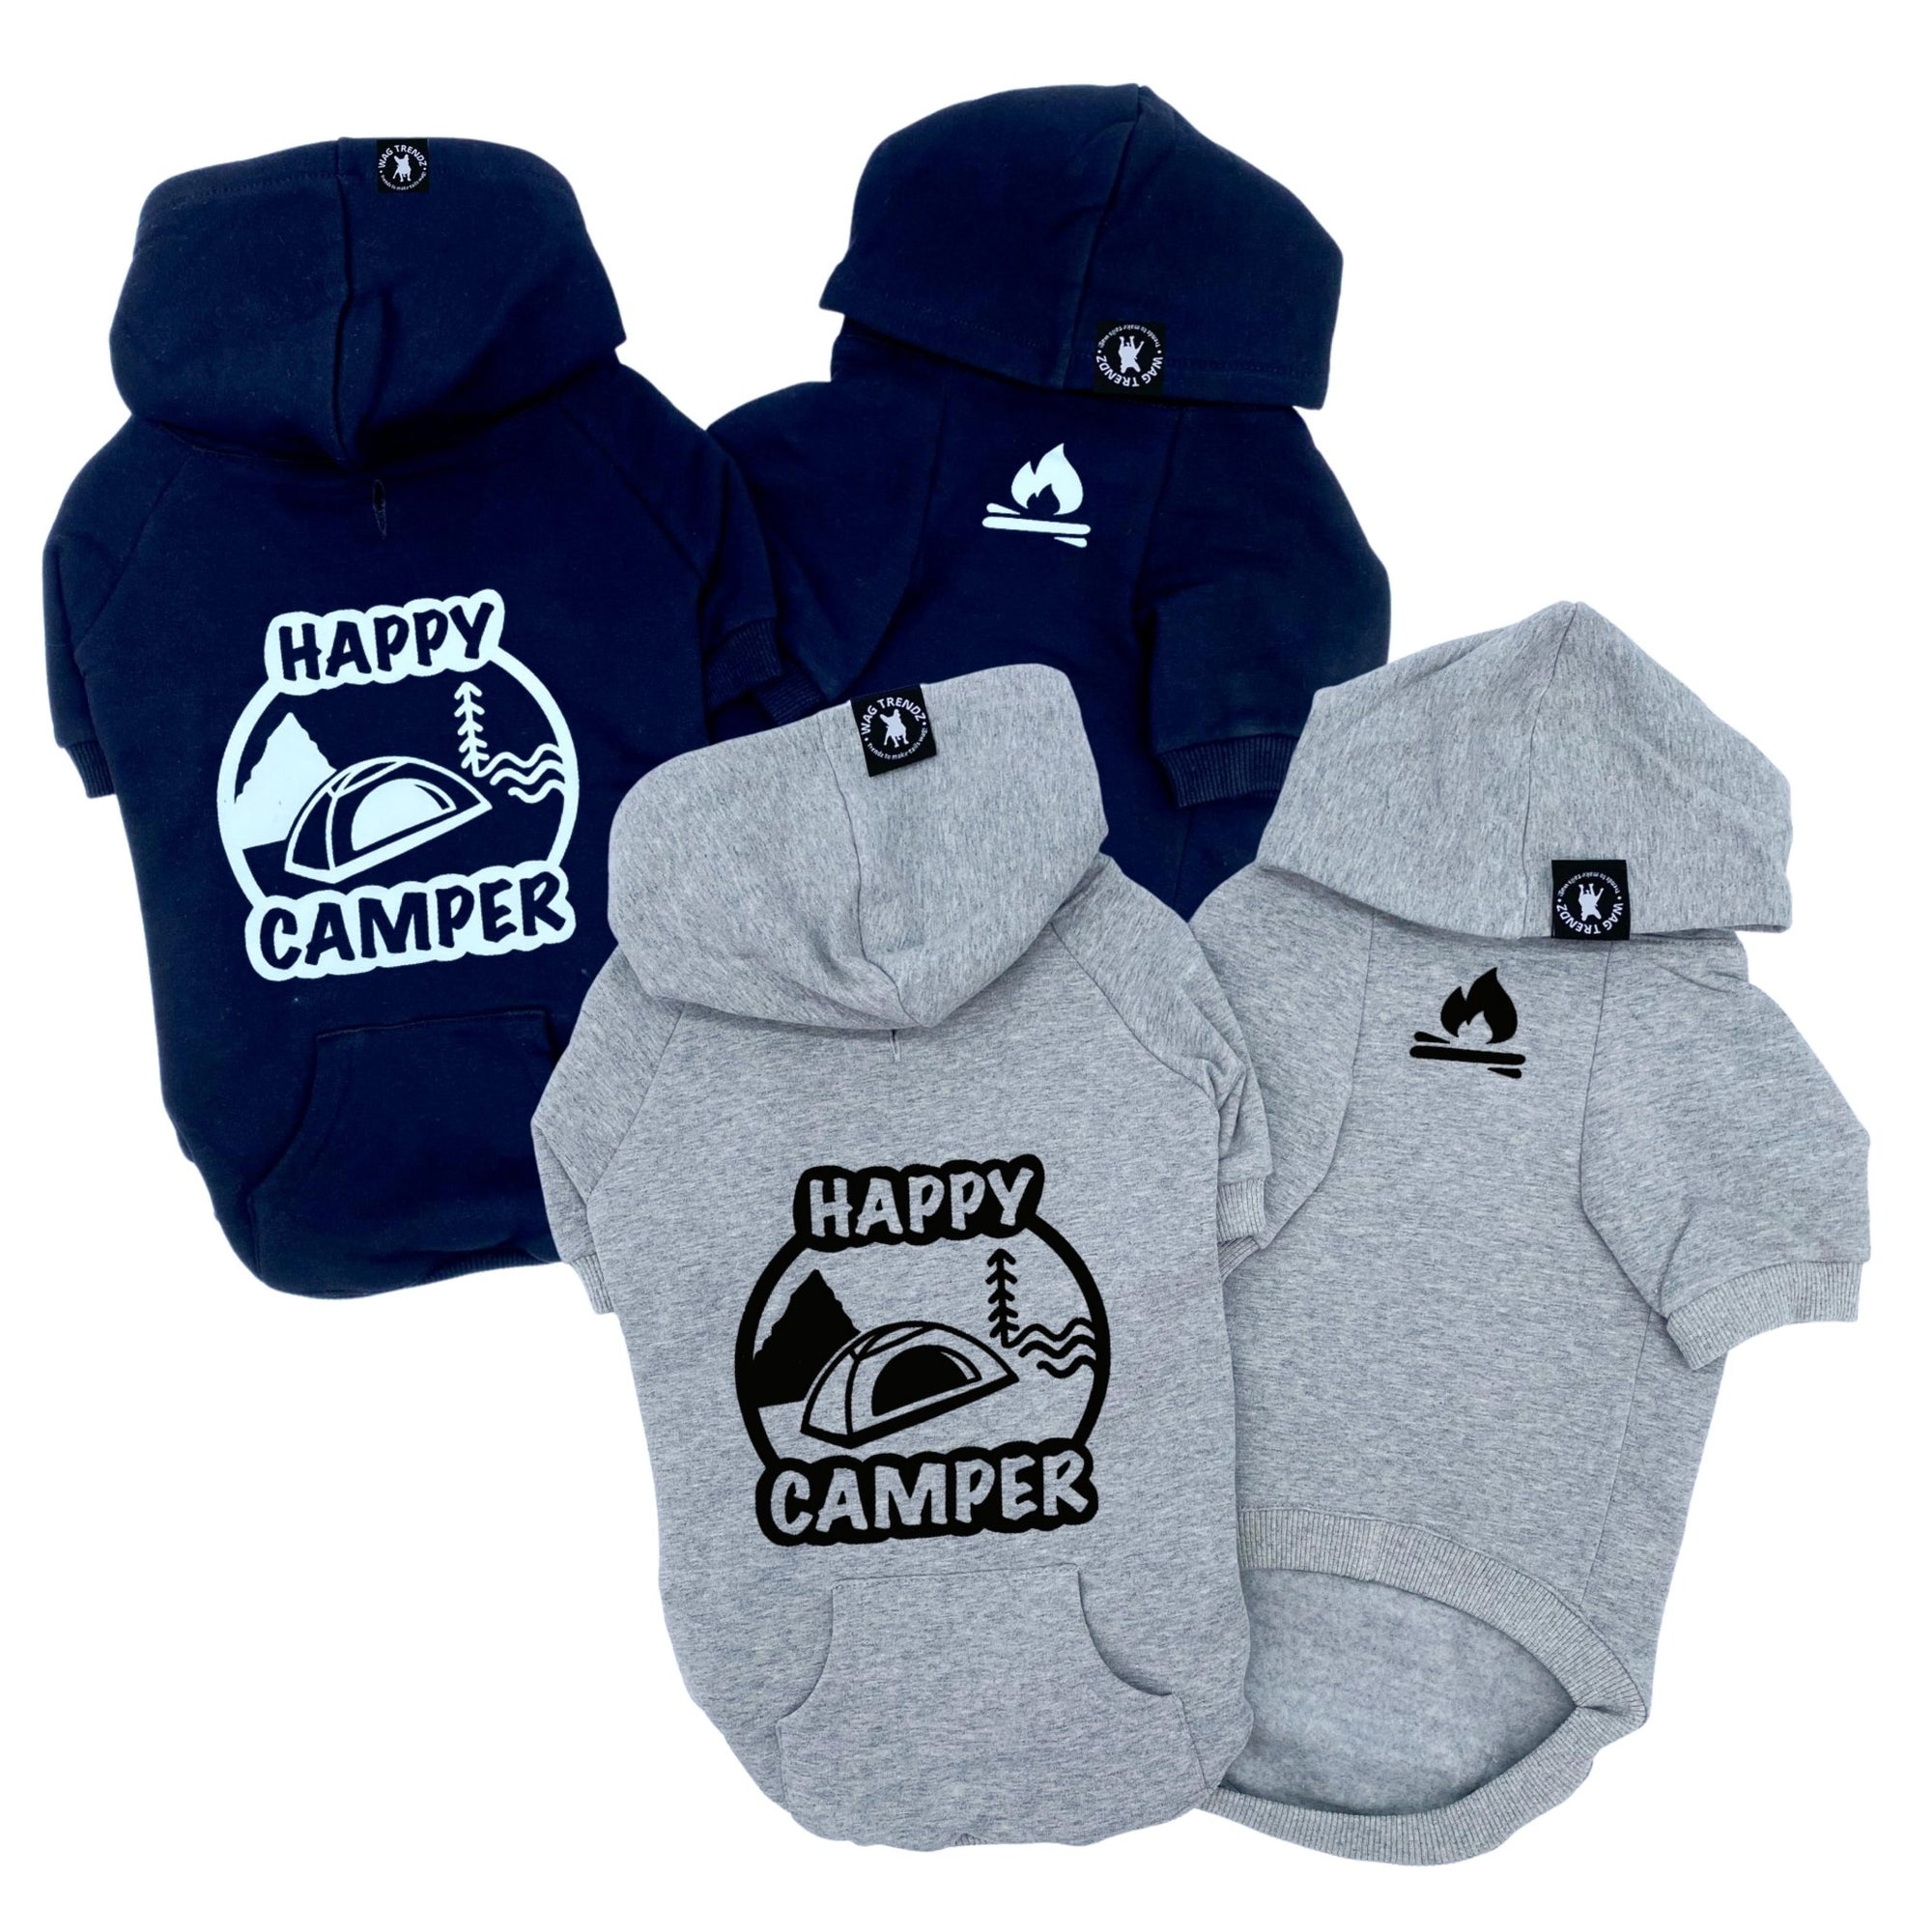 Dog Hoodie - Hoodies For Dogs - &quot;Happy Camper&quot; dog hoodies in black and gray sets - Happy Camper, tent, trees and stream on back and campfire emoji on front chest - against a solid white background - Wag Trendz